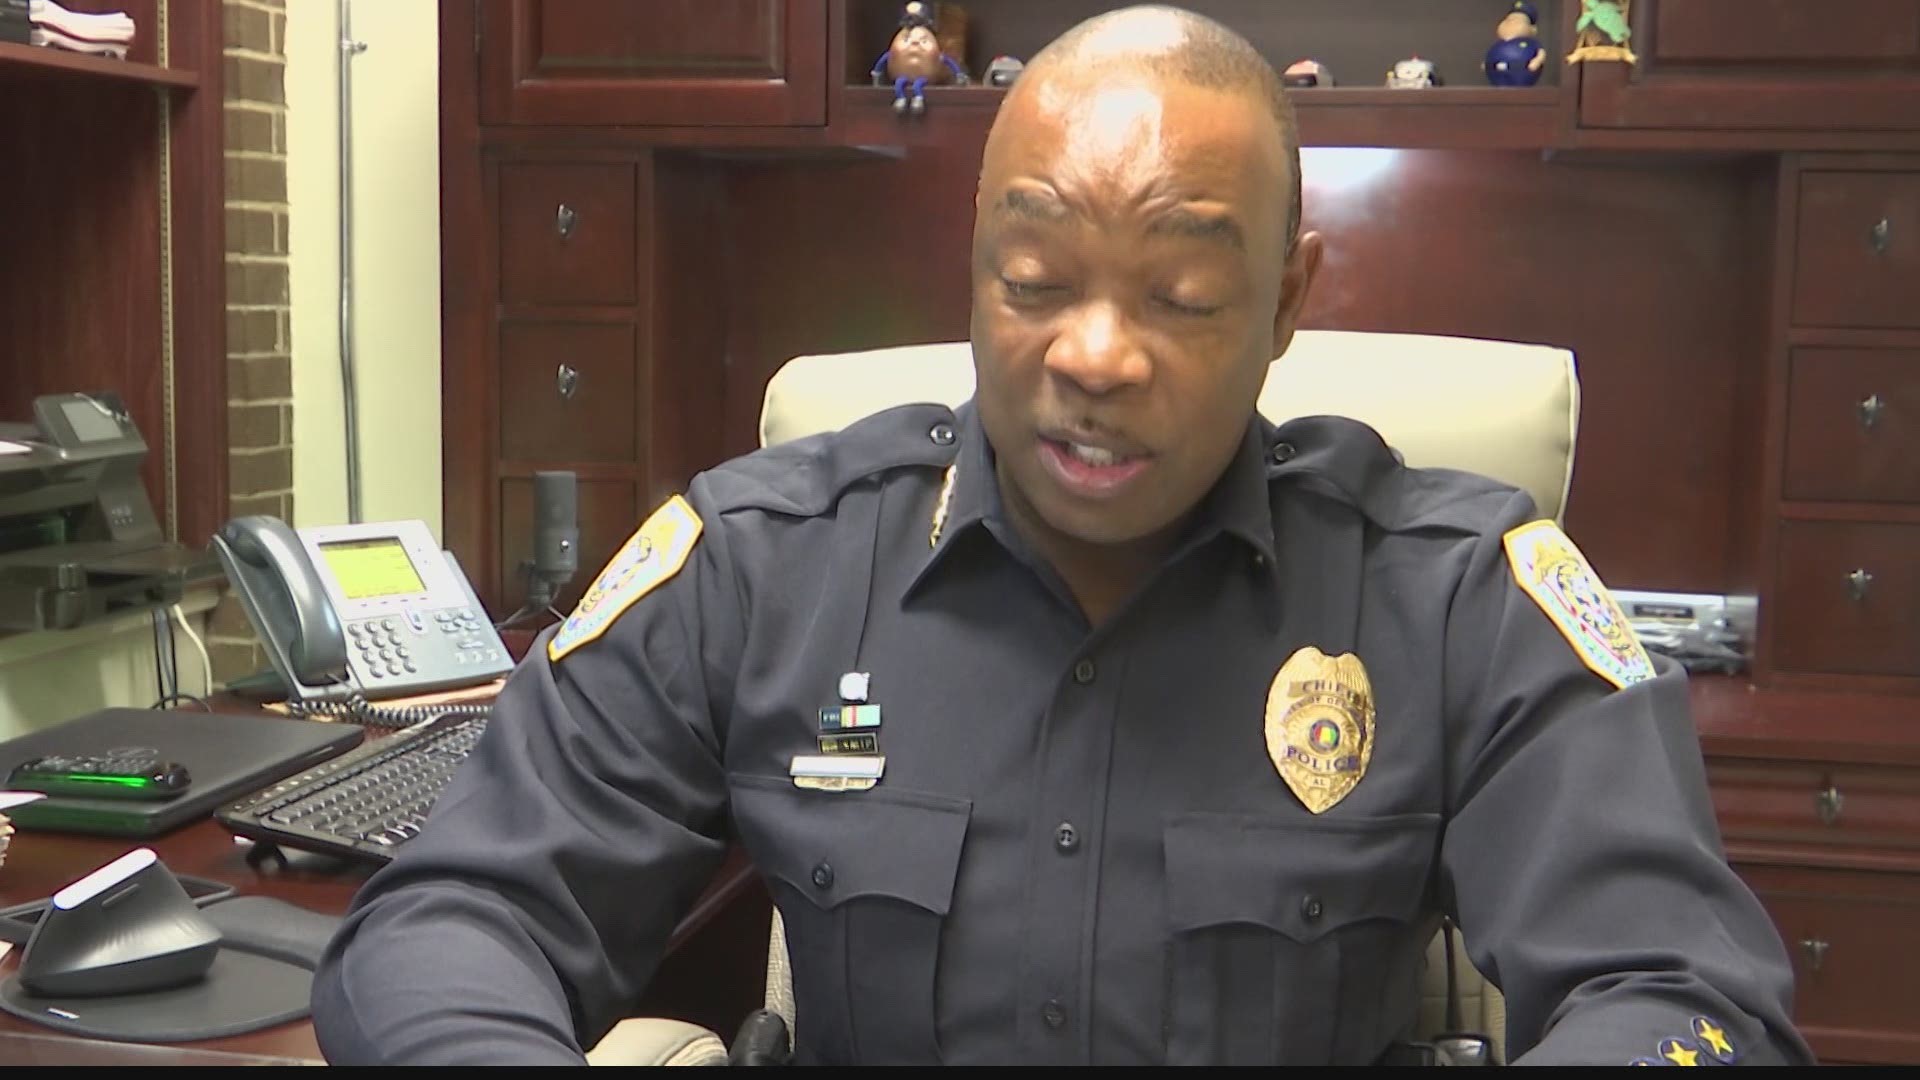 Decatur Chief of Police, Nate Allen, points out the need for "improved" and "proper" training in a few areas of the force.